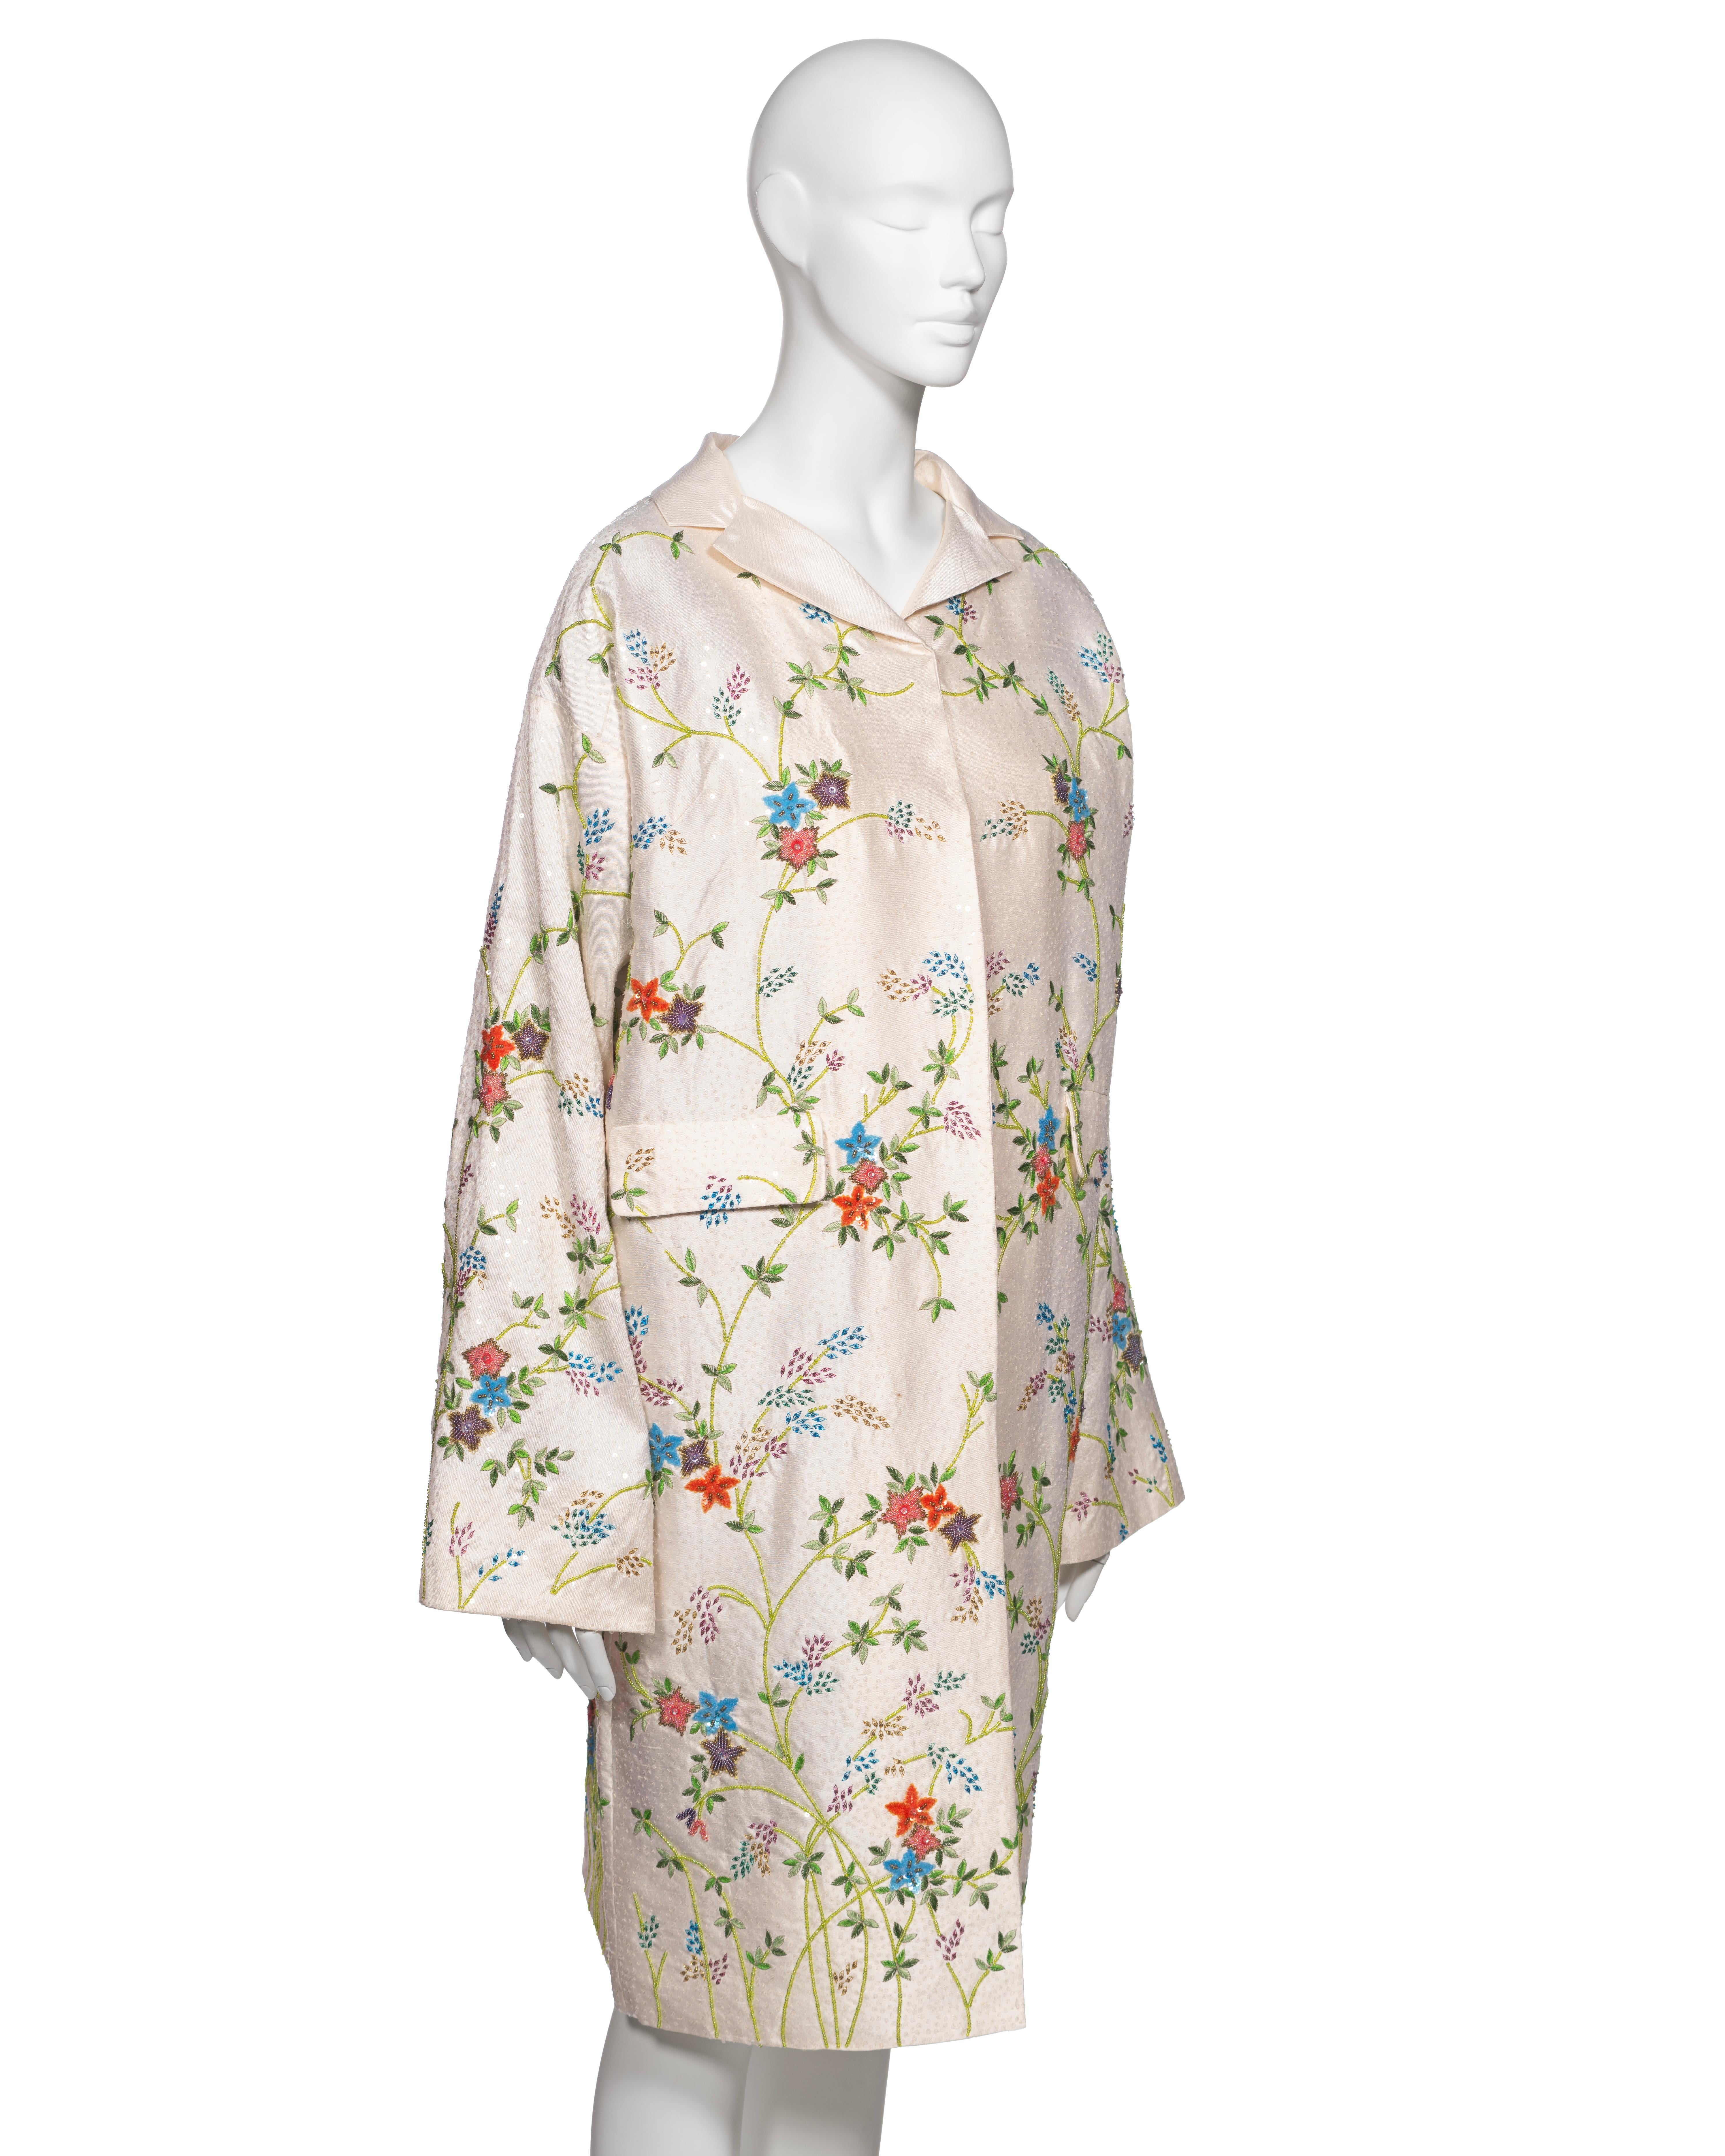 Dolce & Gabbana Hand-Embroidered White Raw Silk Evening Couture Coat, ss 1997 For Sale 4